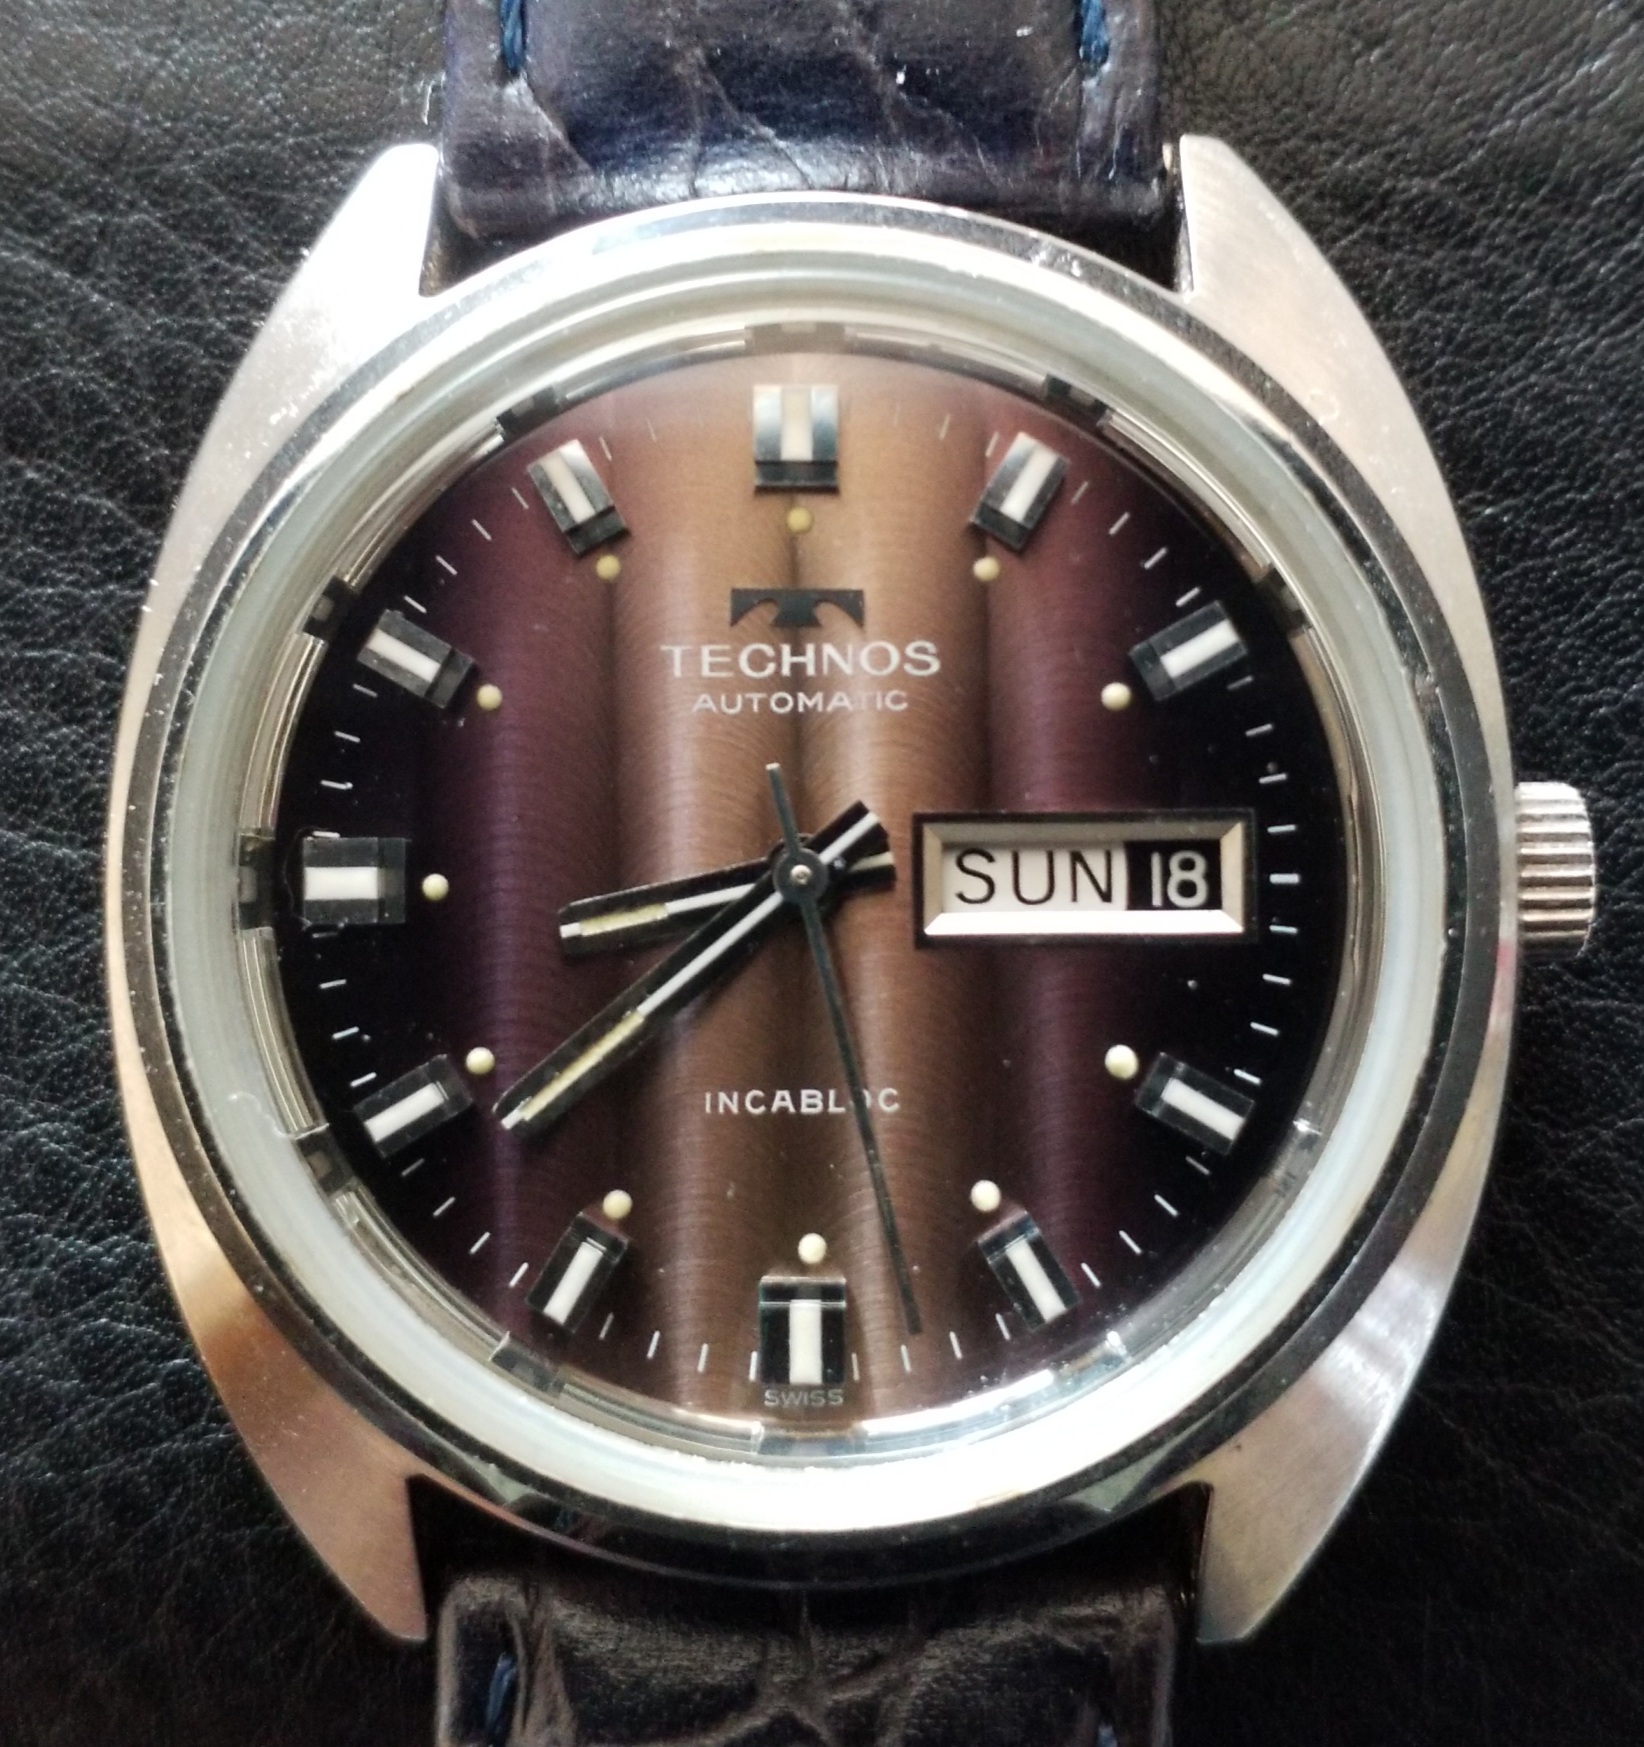 Show us your purple watches! | Omega Forums